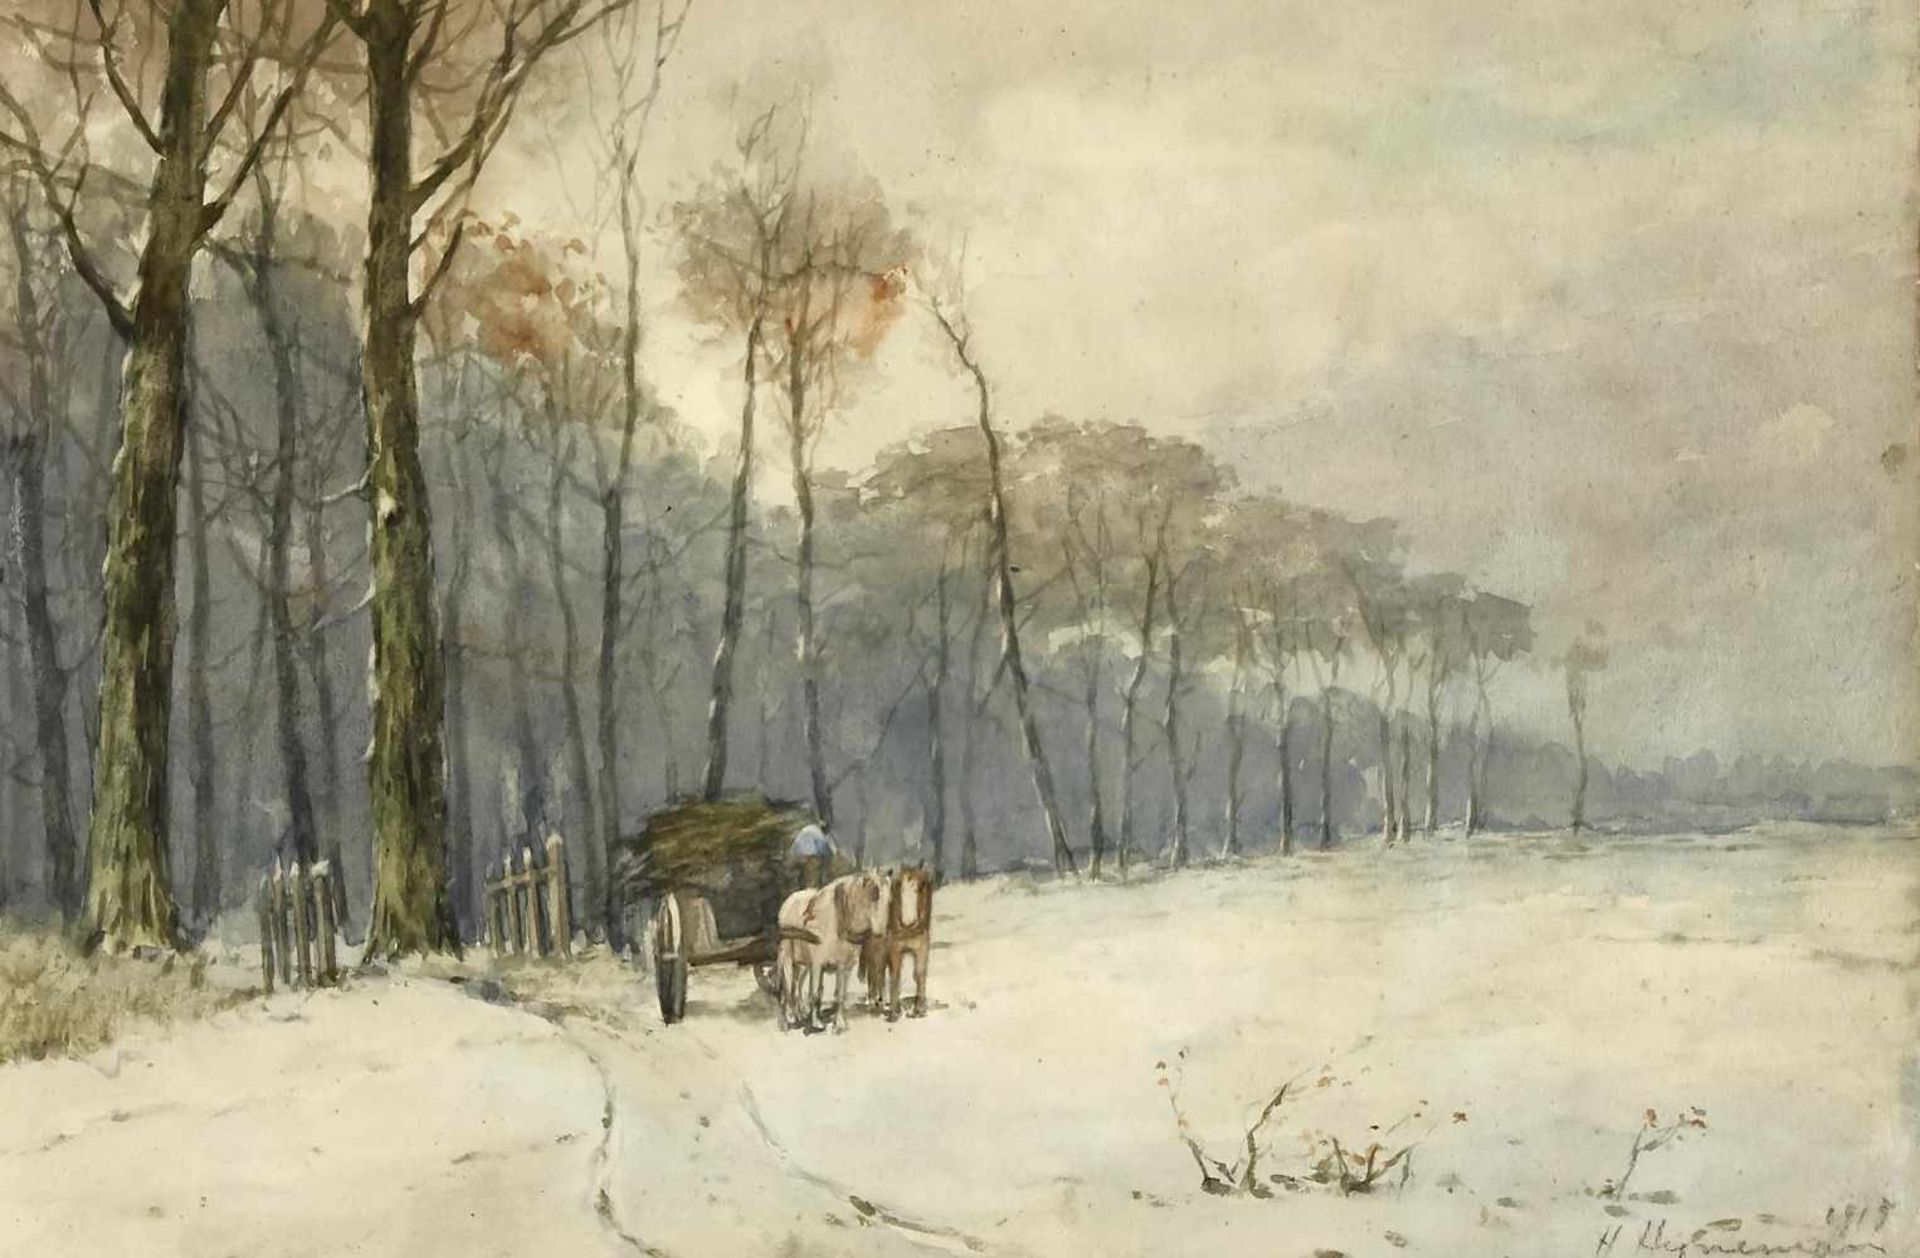 H. Heynemann, painter around 1915, horse-drawn cart loaded with wood on snowy edge of